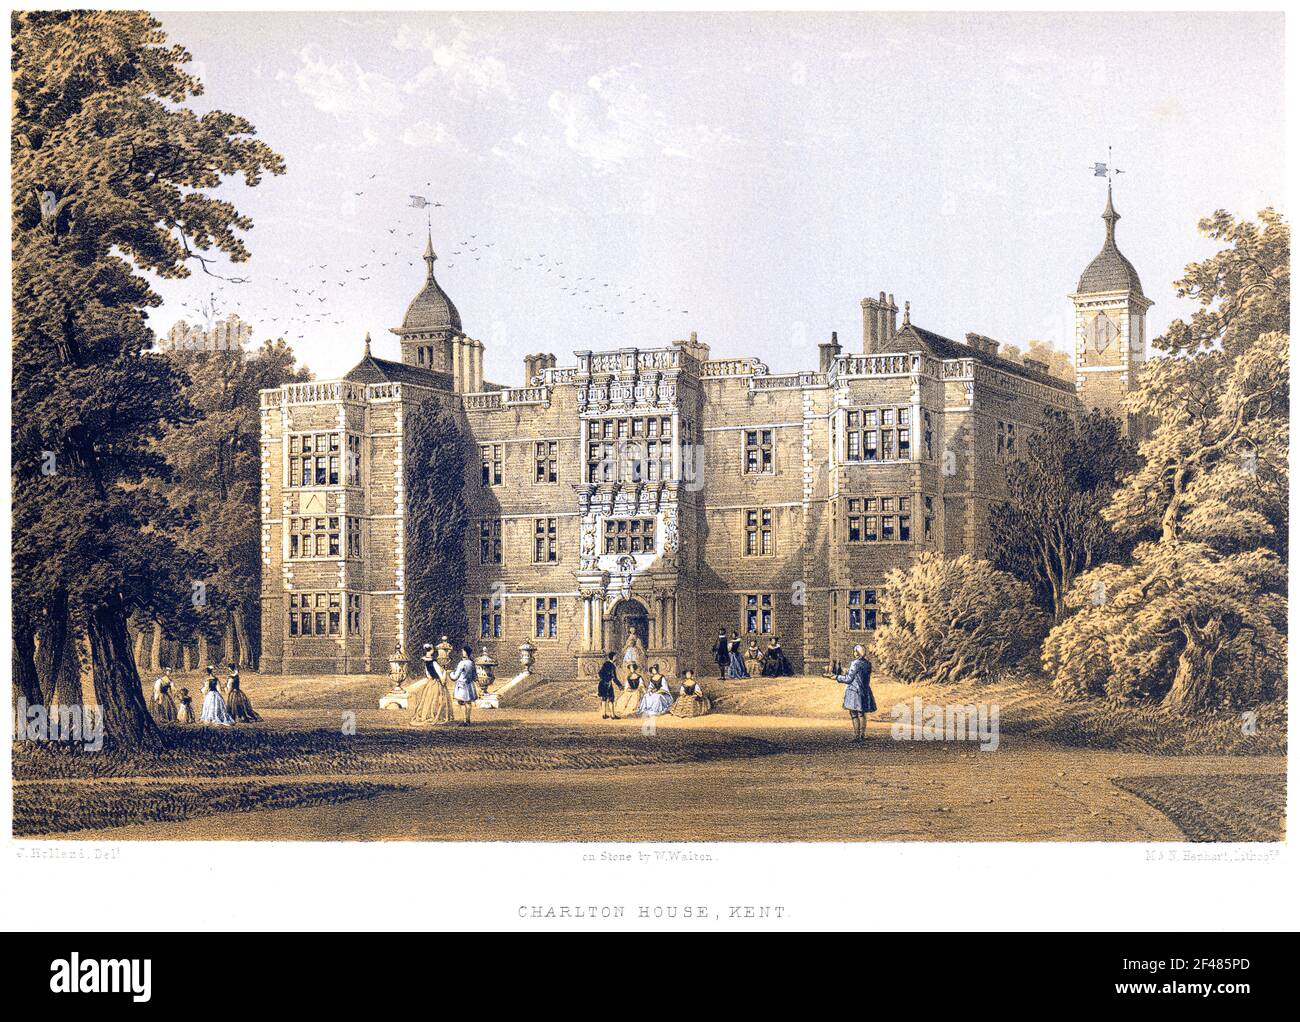 A lithotint of Charlton House, Kent (Greenwich) UK scanned at high resolution from a book printed in 1858. Believed copyright free. Stock Photo